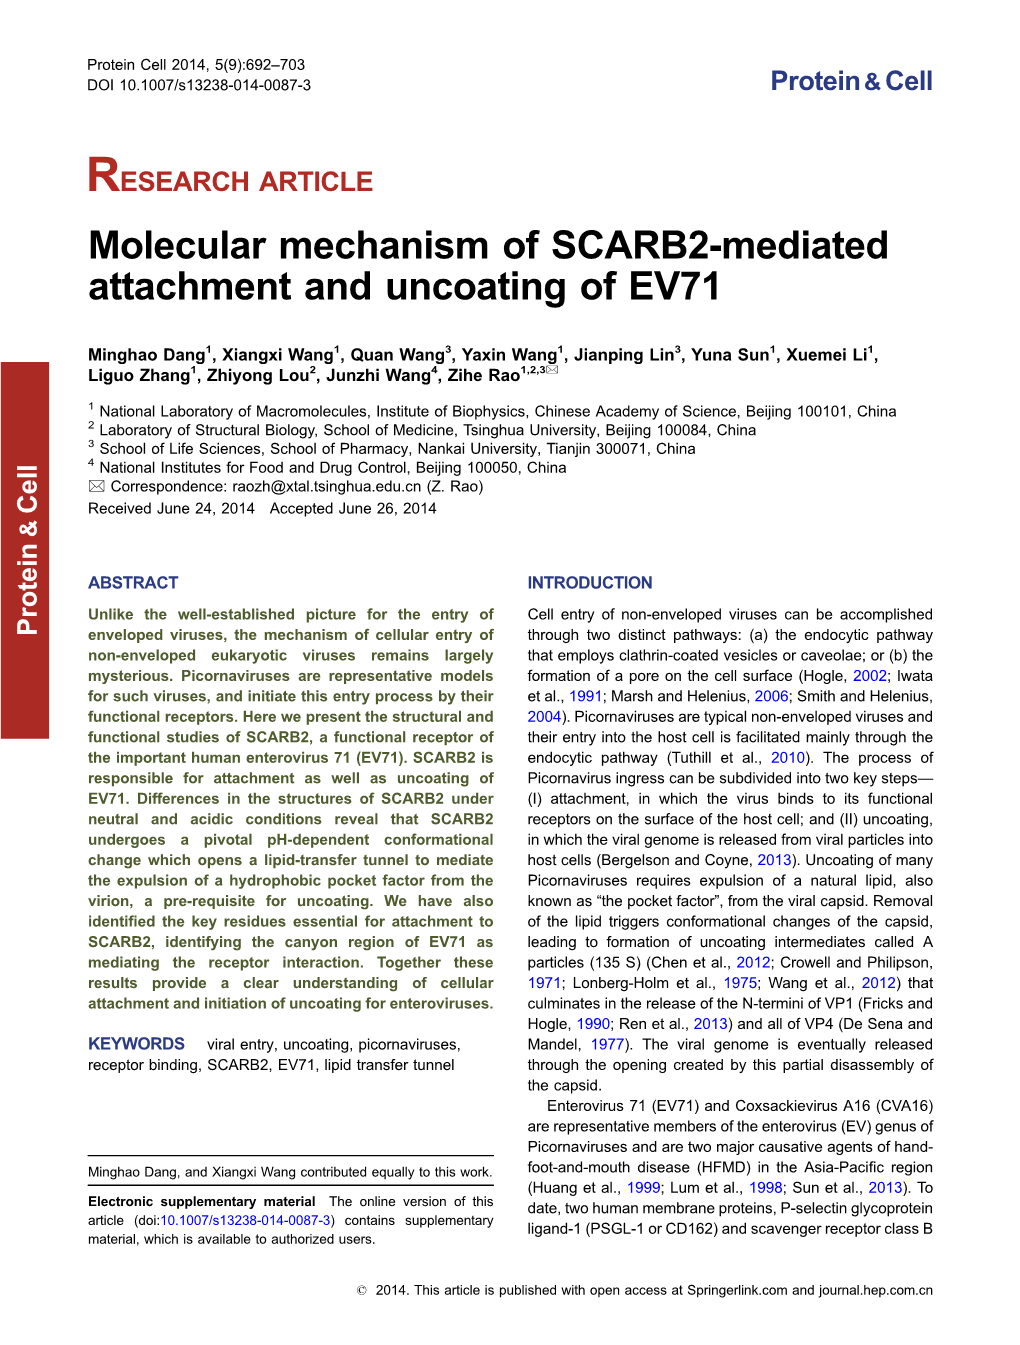 Molecular Mechanism of SCARB2-Mediated Attachment and Uncoating of EV71